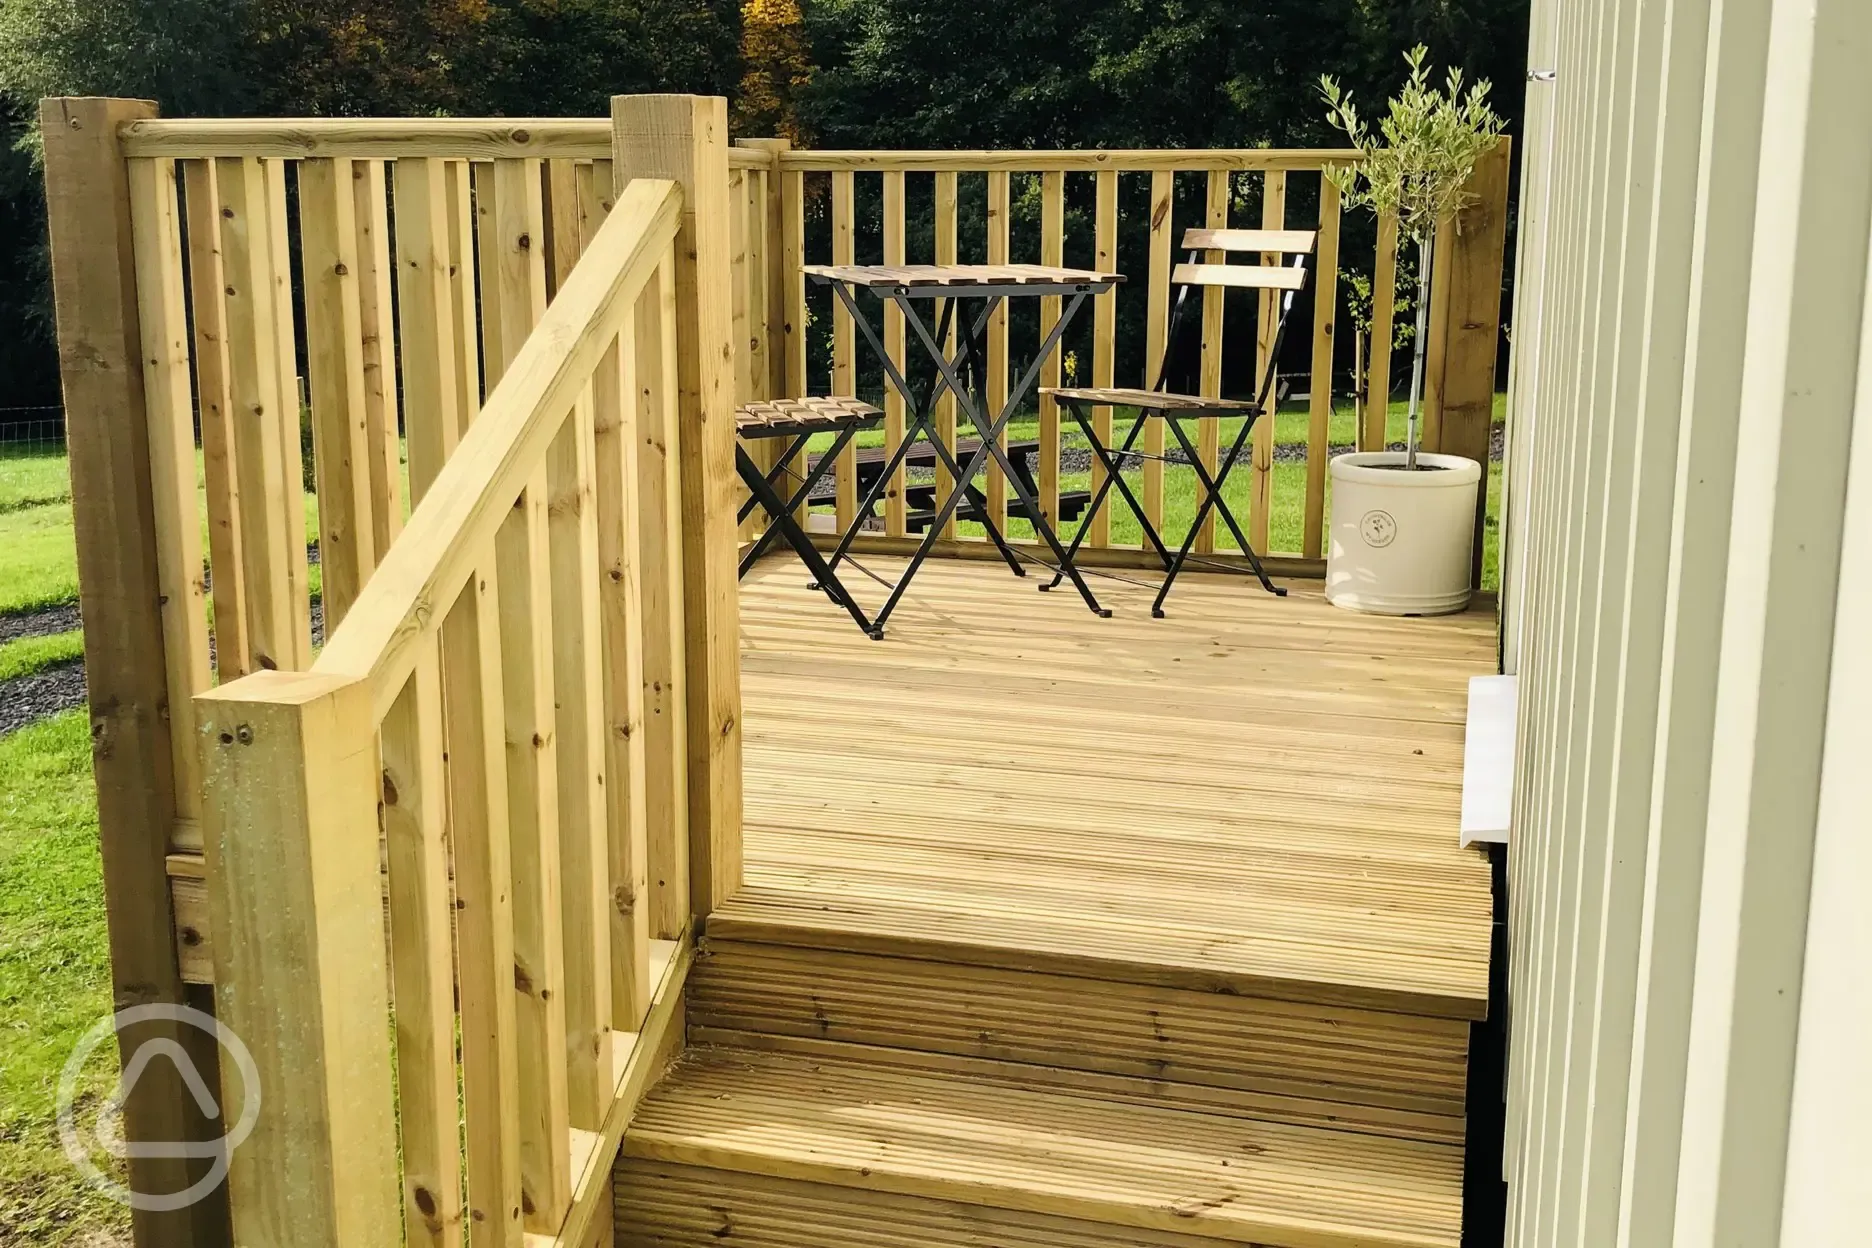 Outside decking